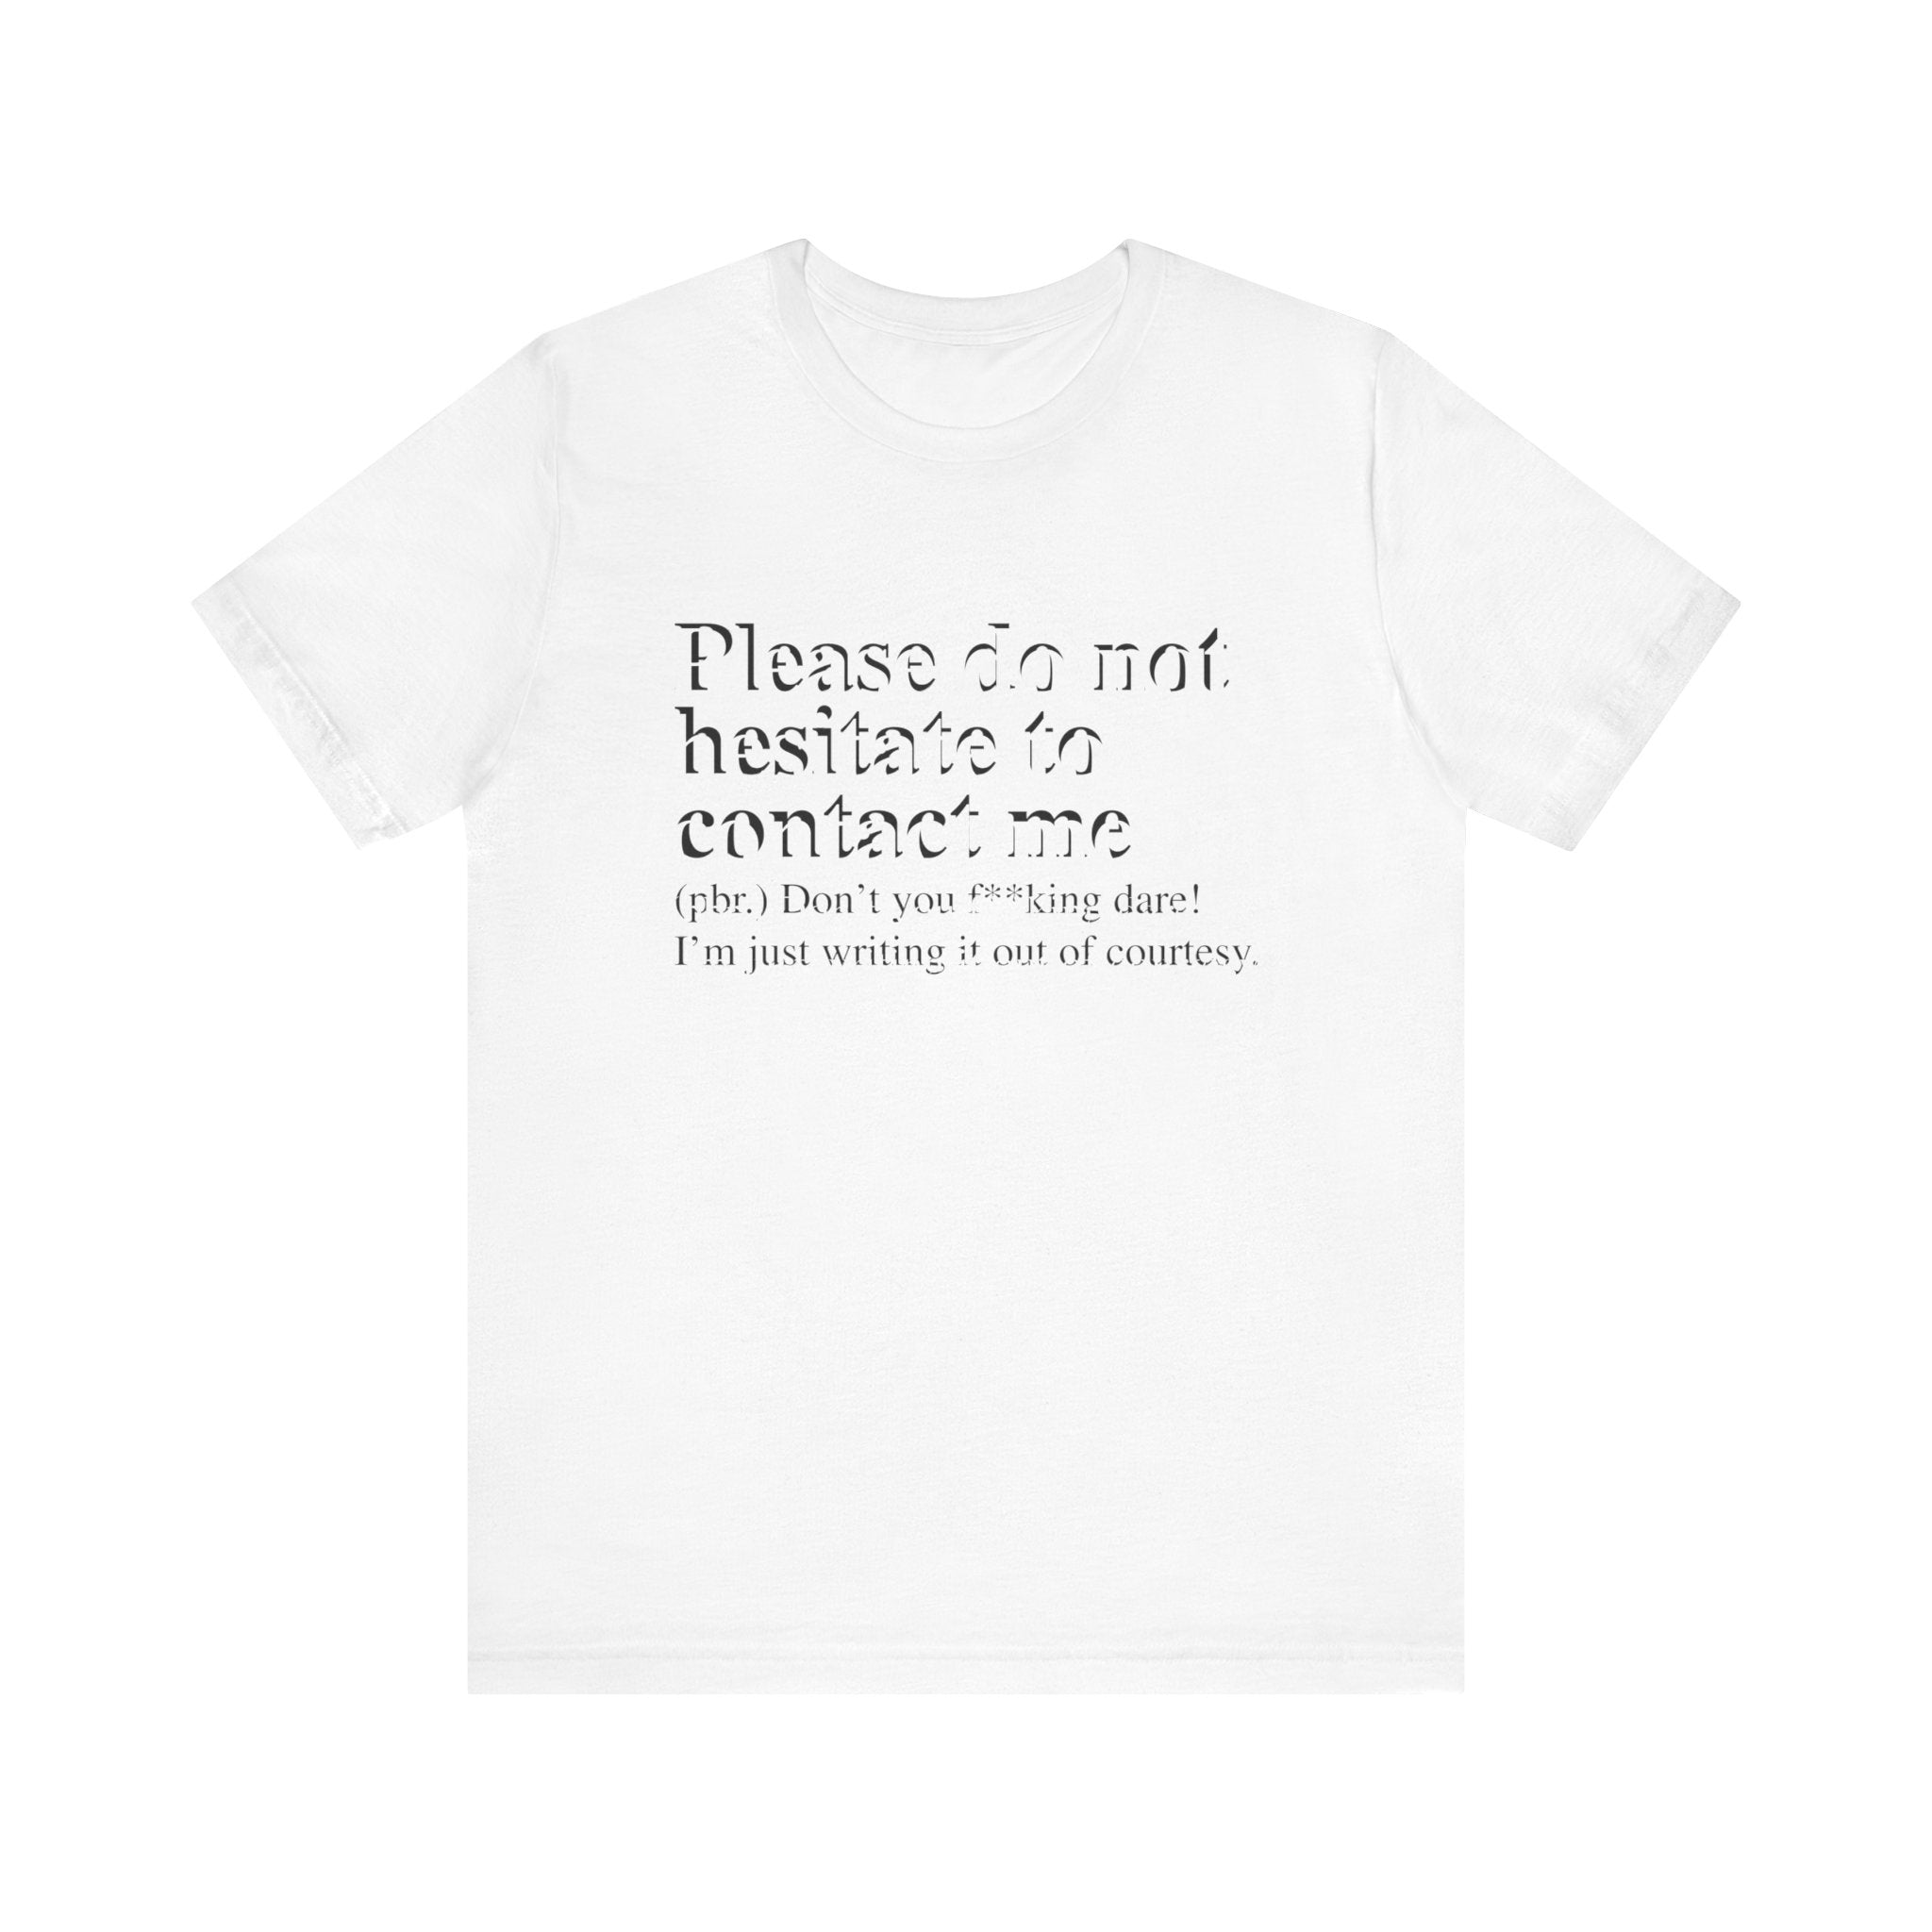 White Please Do Not Hesitate to Contact Me T-Shirt made from soft cotton, featuring text that reads "please do not hesitate to contact me (pbr. don't you f*ing dare! I'm just writing it out of courtesy